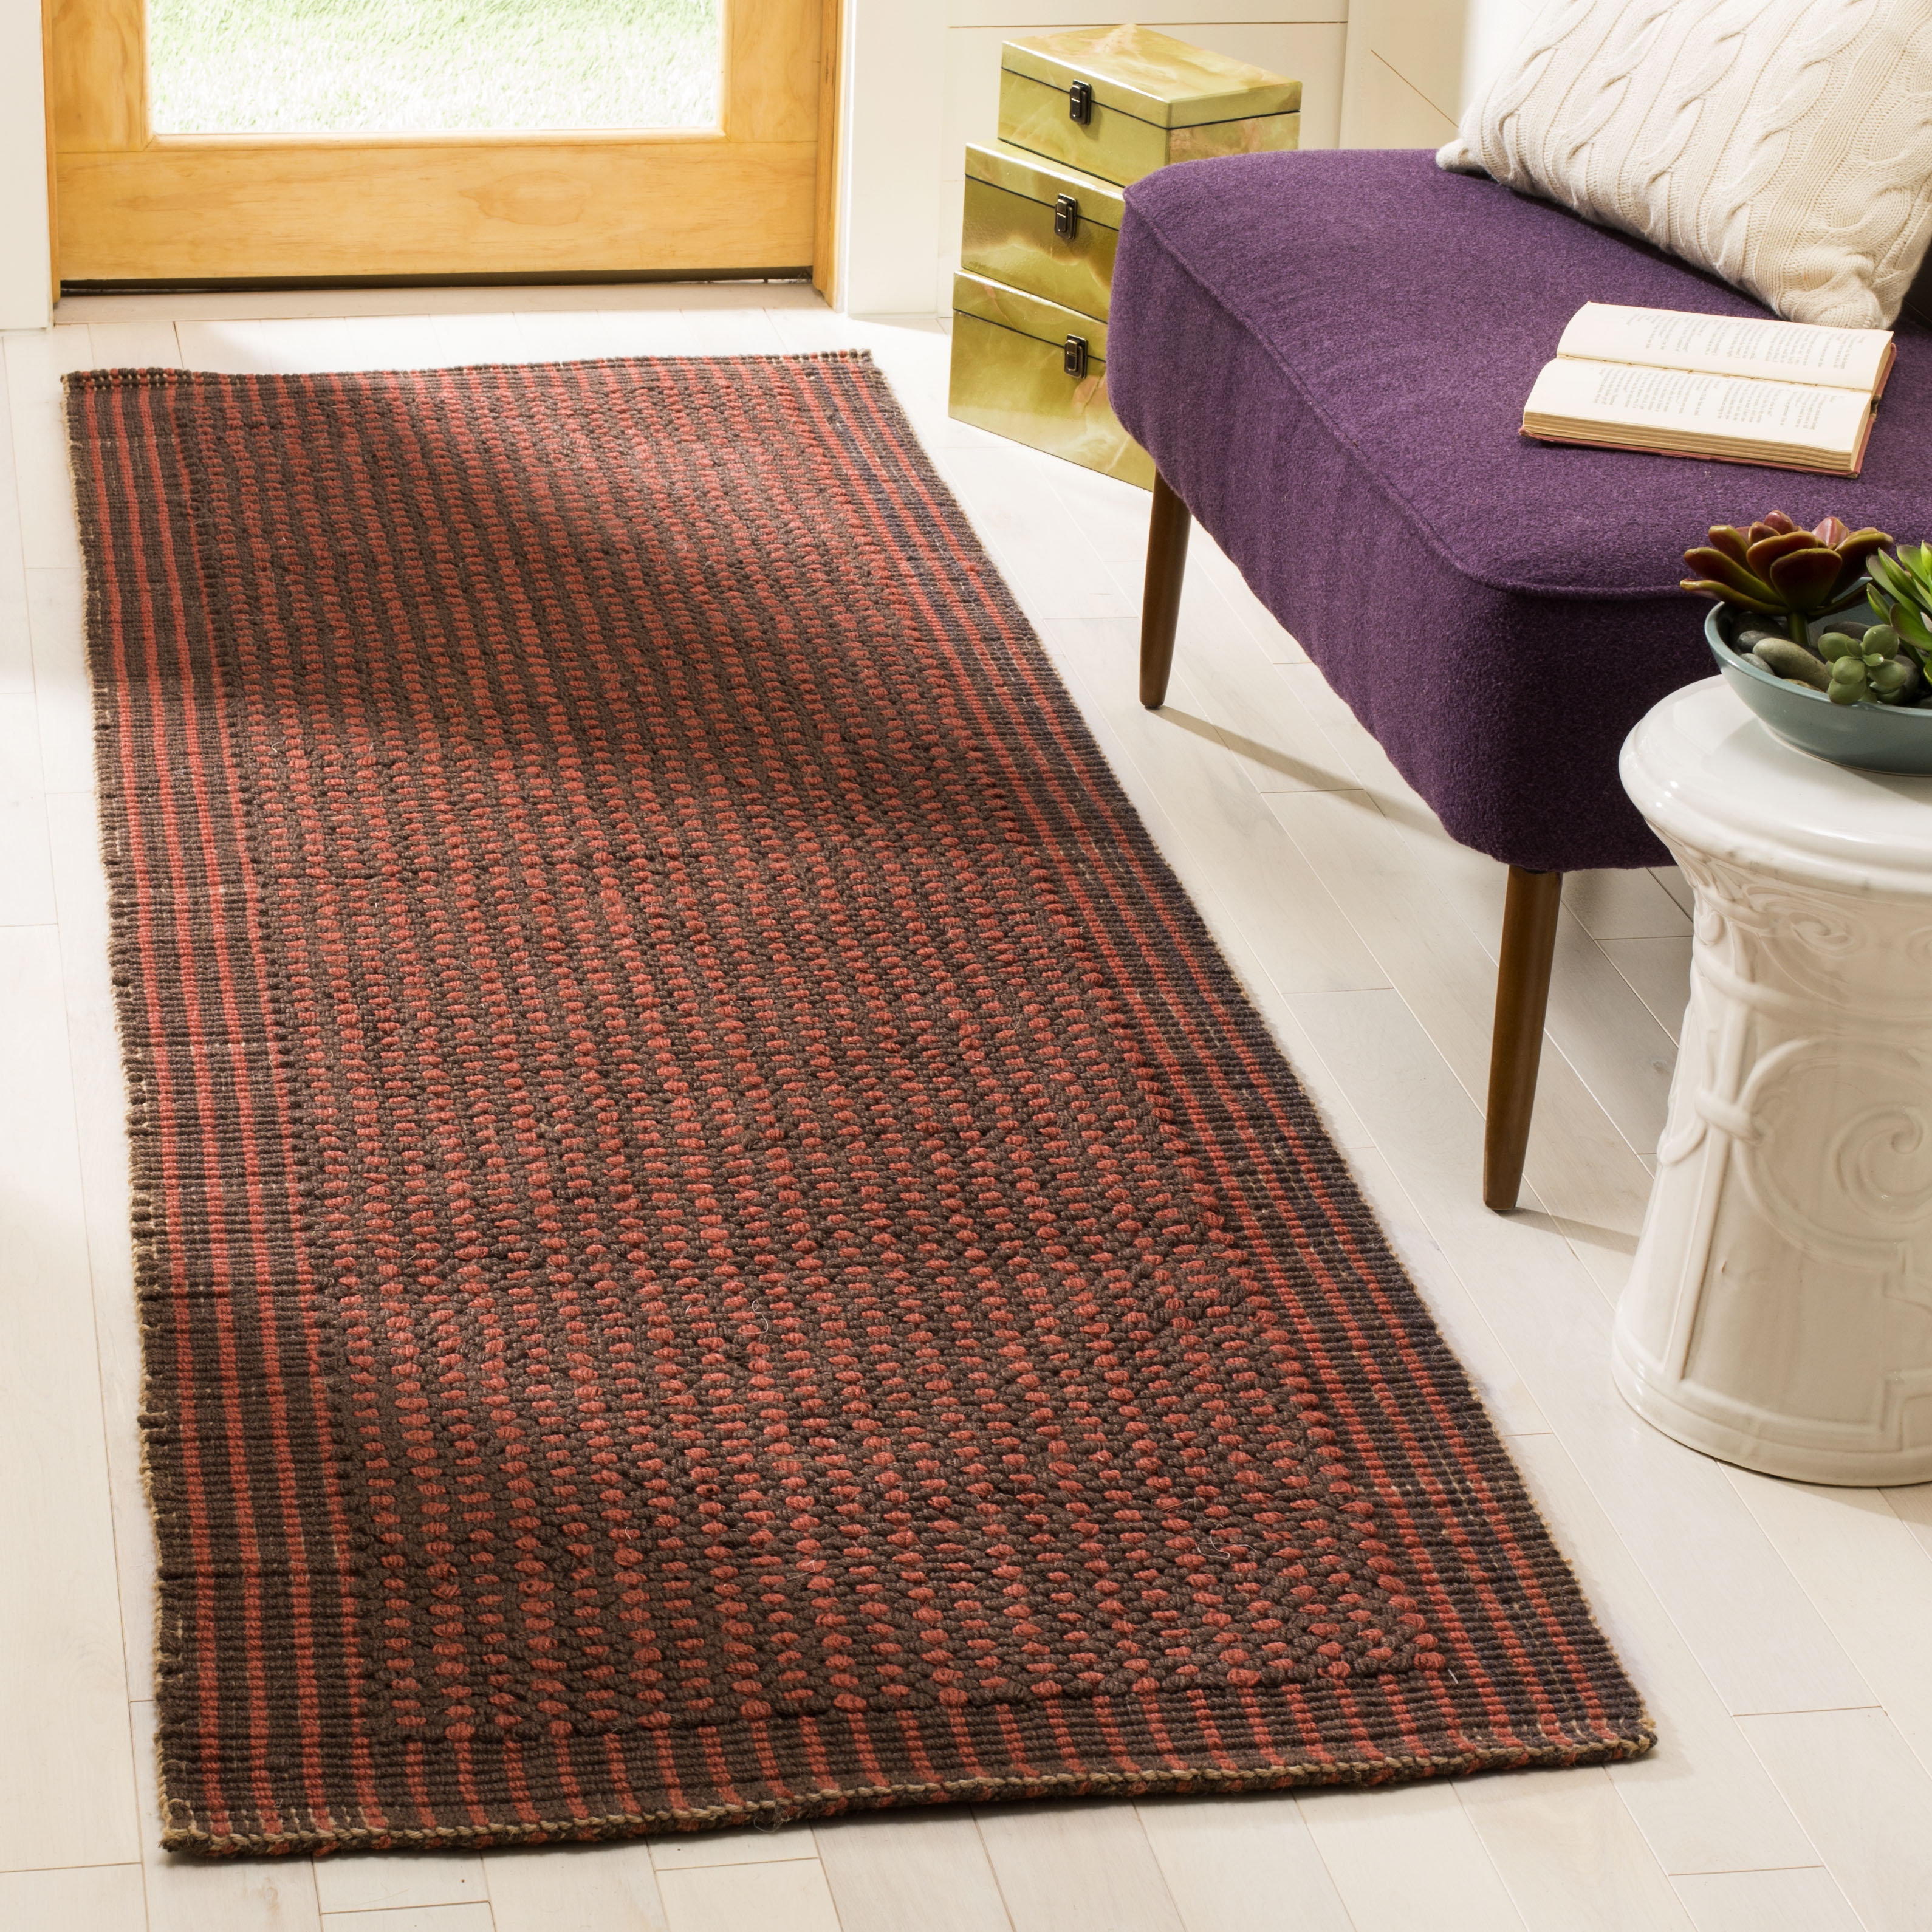 Arlo Home Hand Woven Area Rug, NF451A, Brown/Rust,  2' 6" X 8' - Image 1